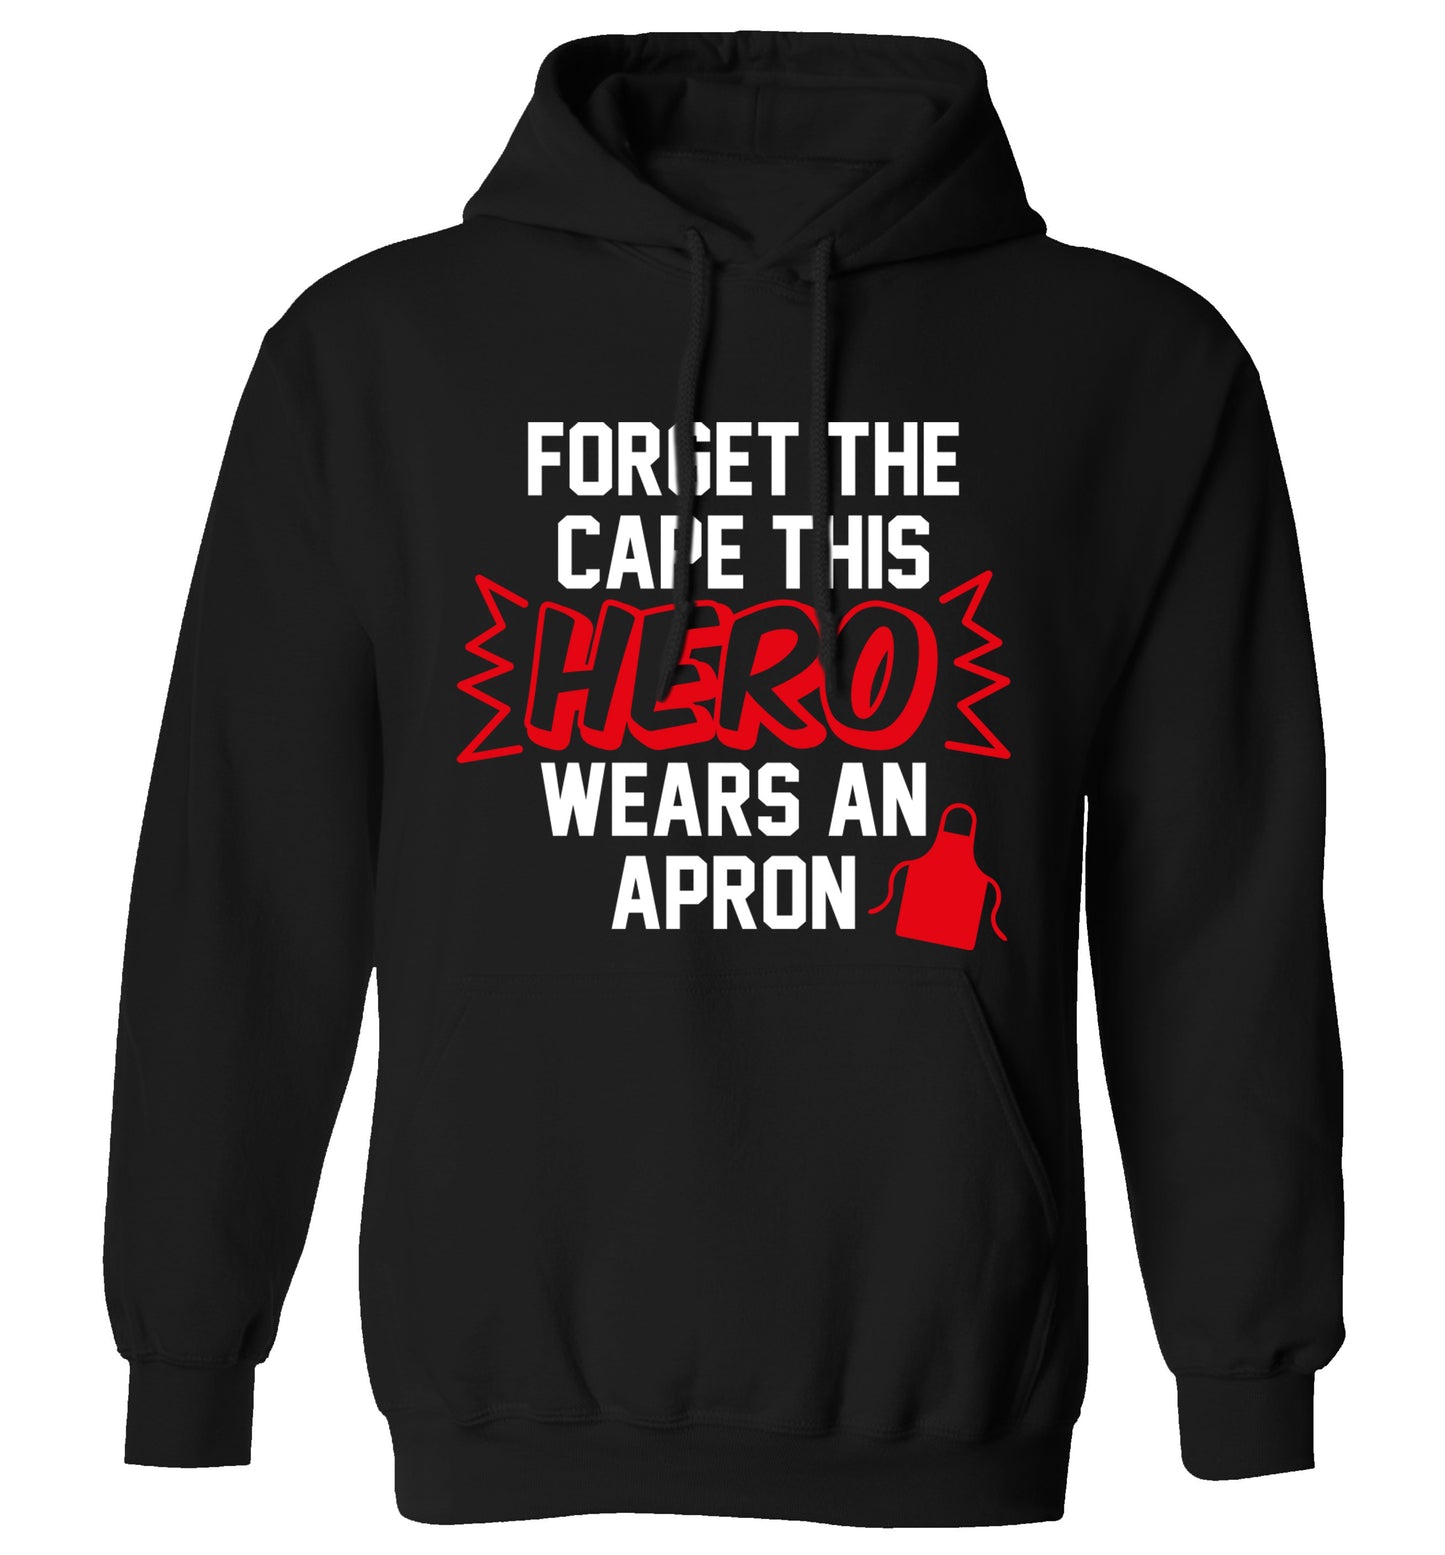 Forget the cape this hero wears an apron adults unisex black hoodie 2XL